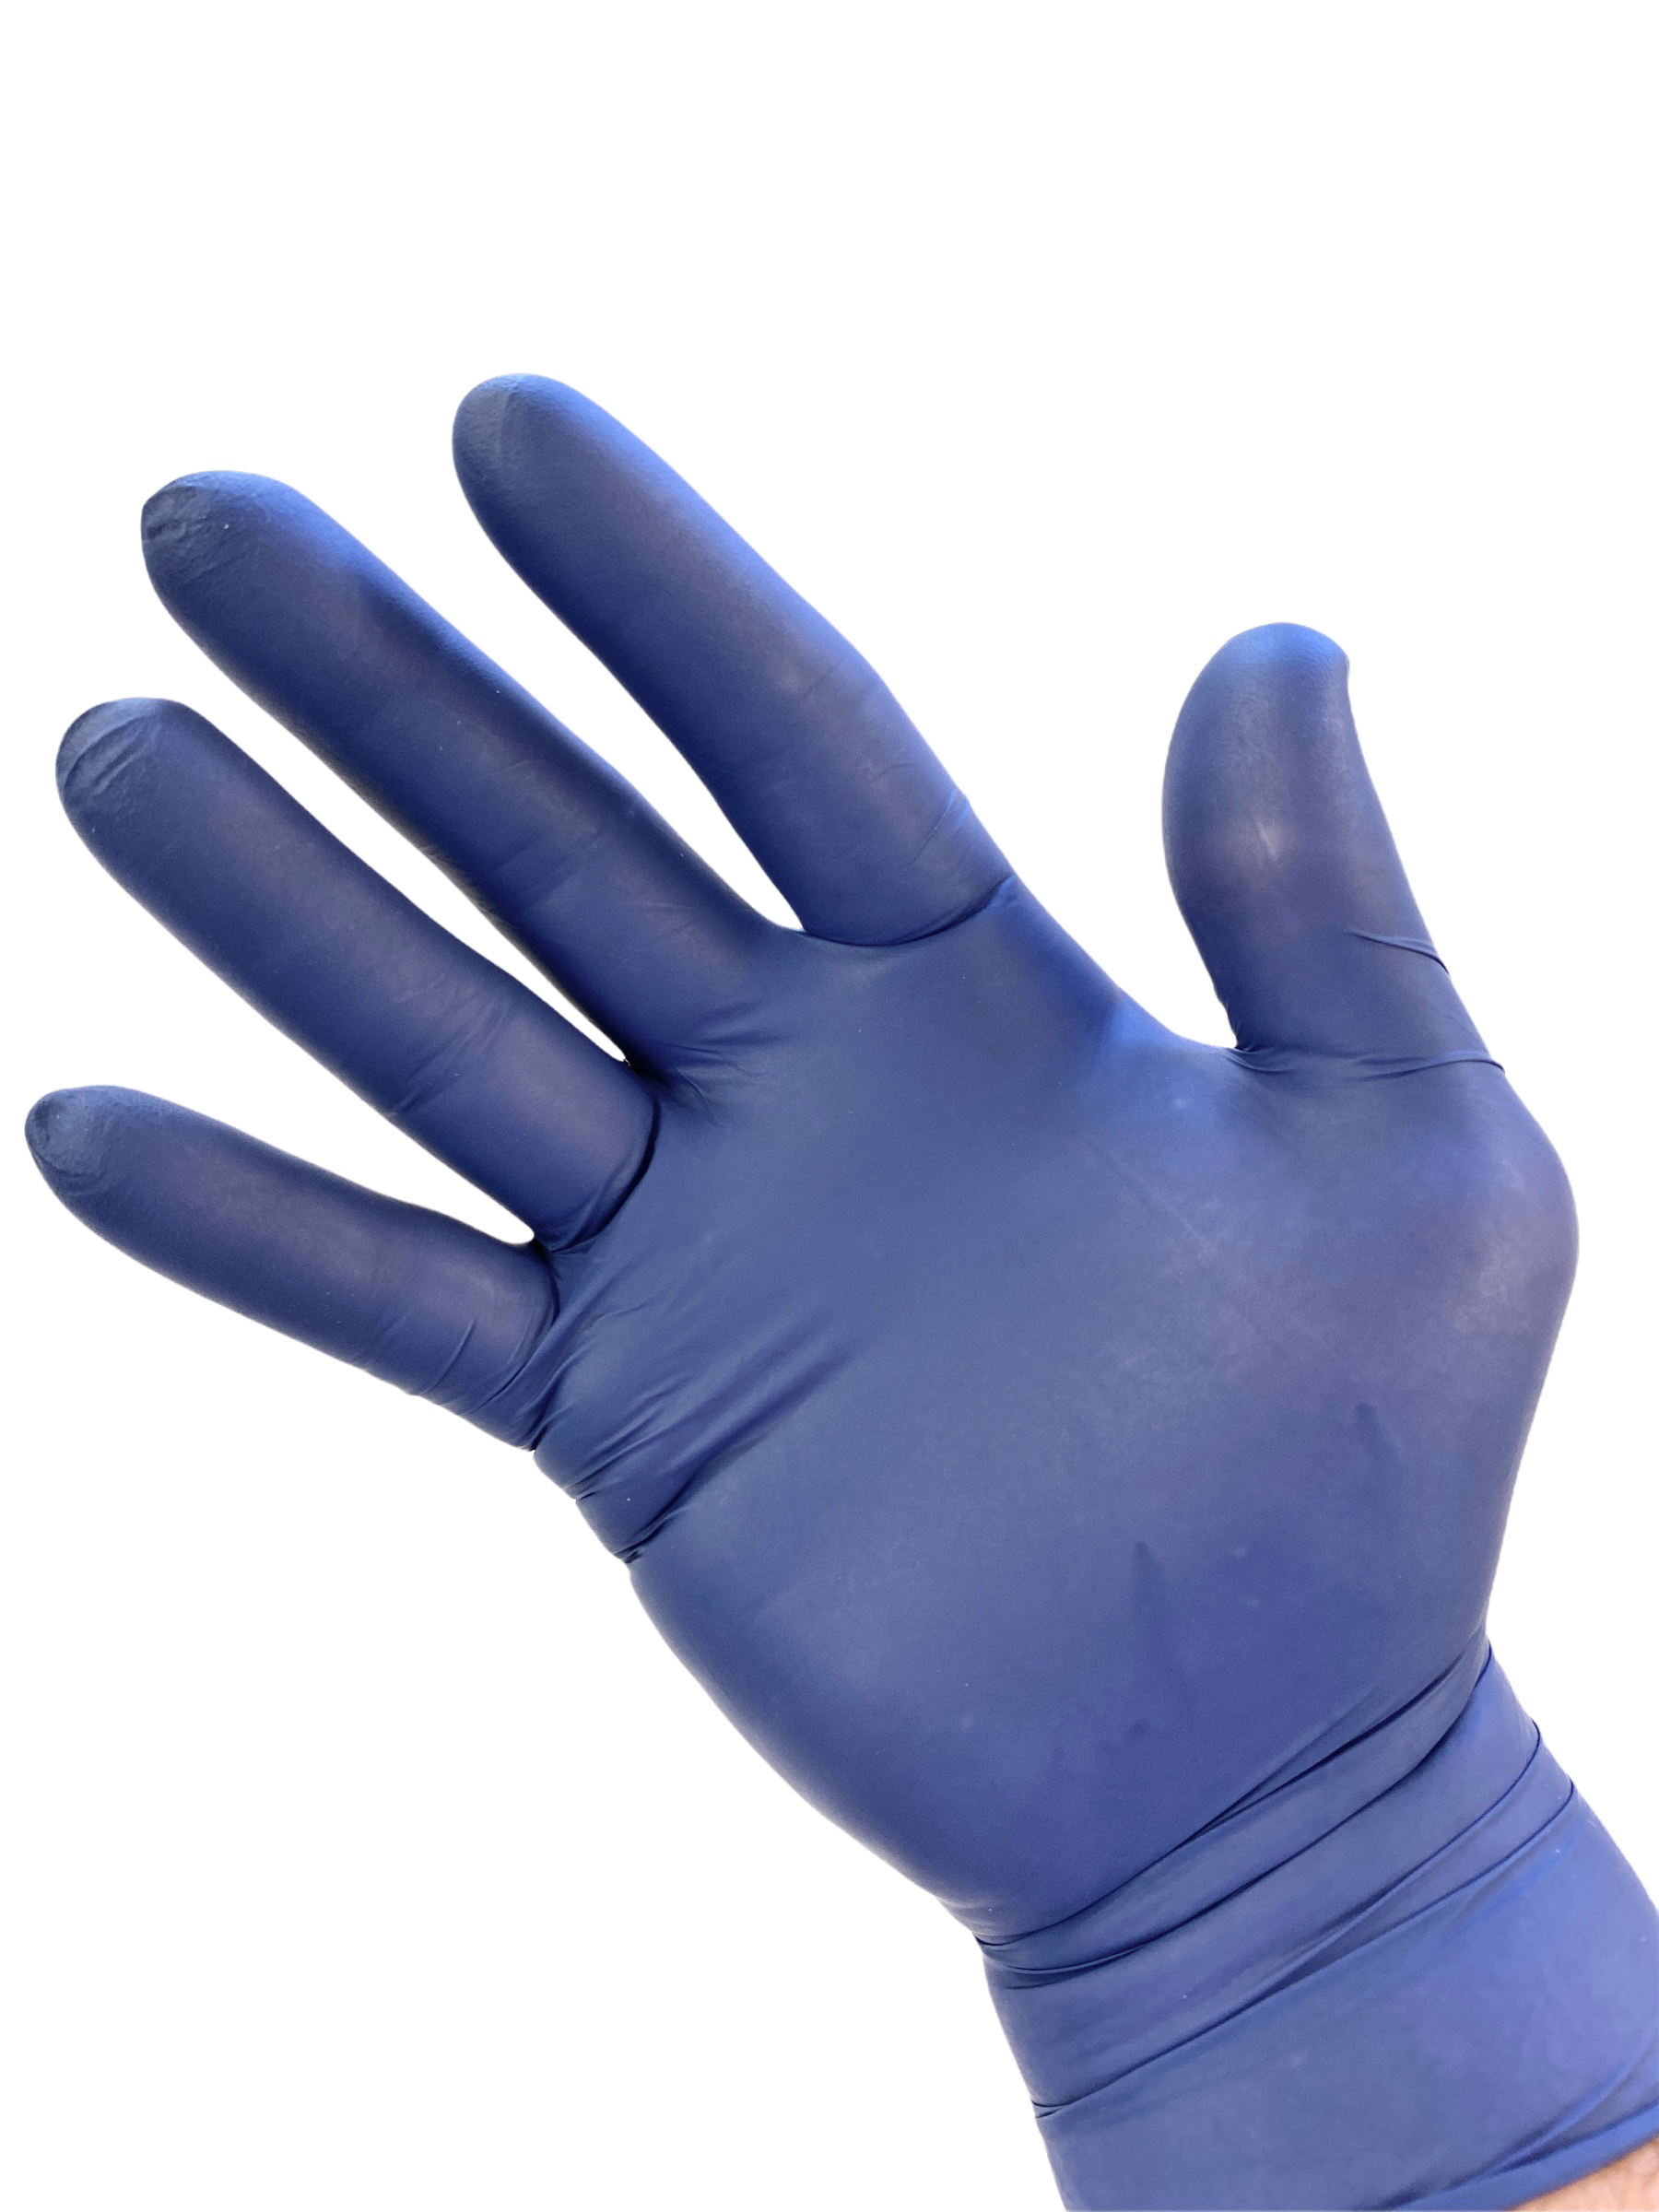 Cranberry Transcend Nitrile Exam Gloves on a hand